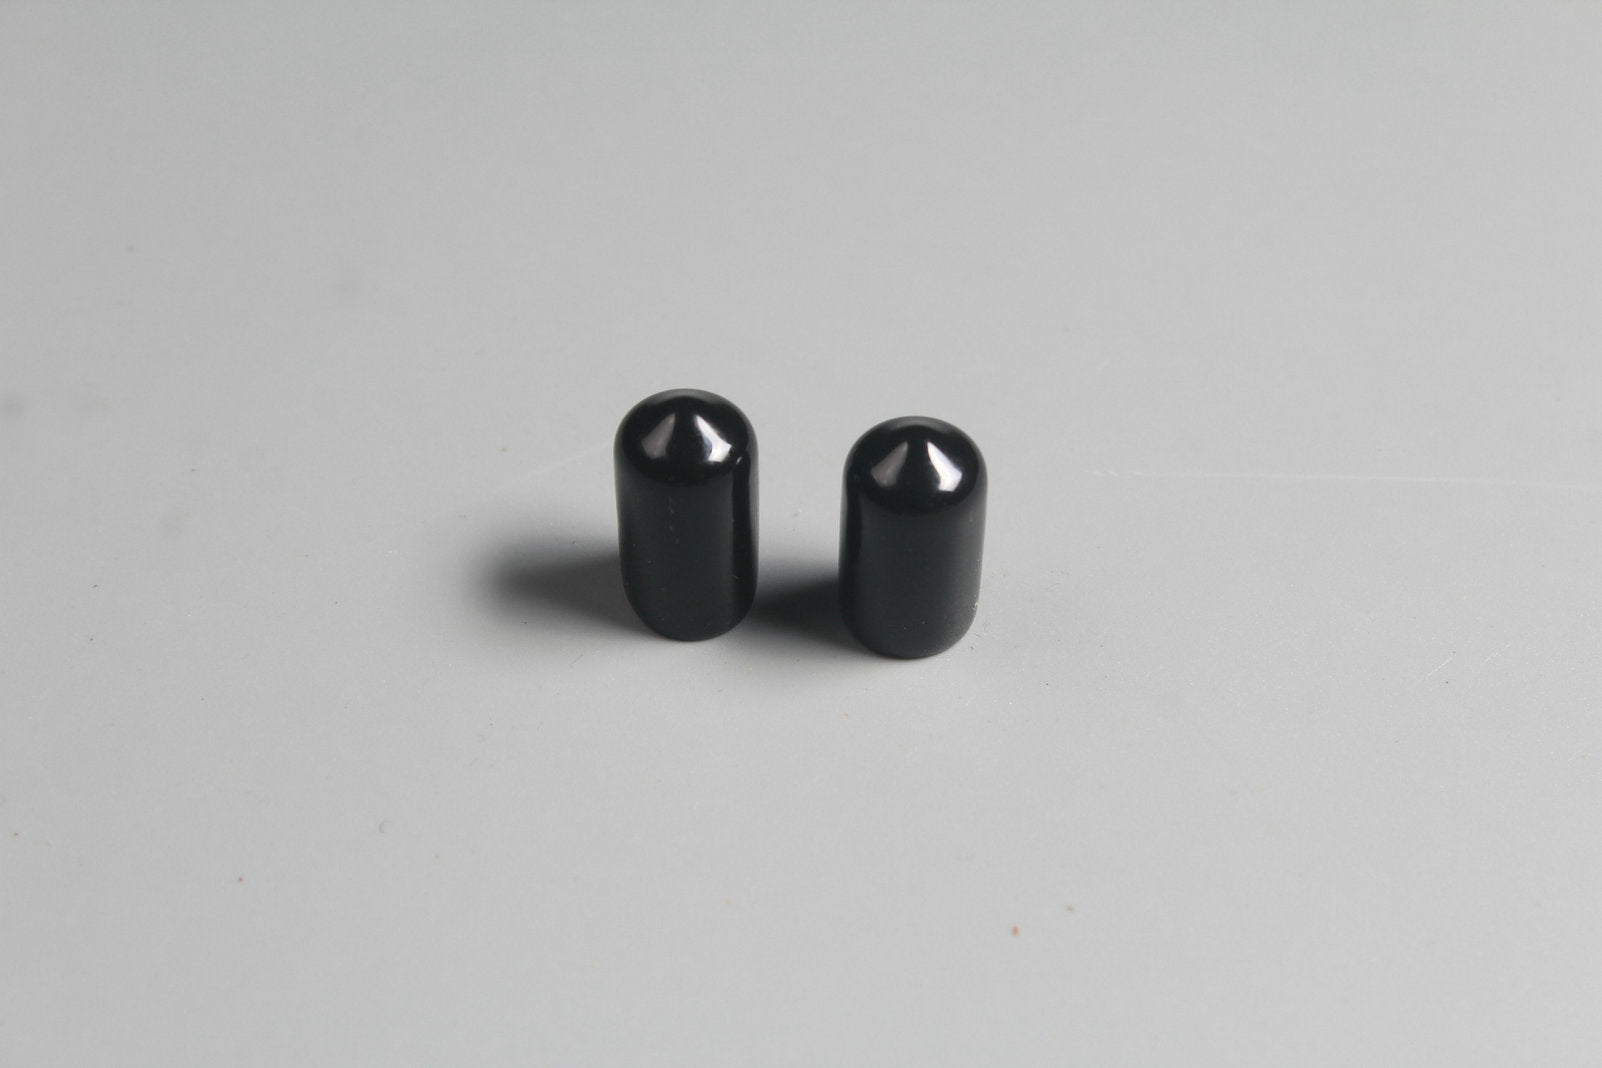 2 pcs Rubber tip protective sleeve supplies 10/12/13/14mm